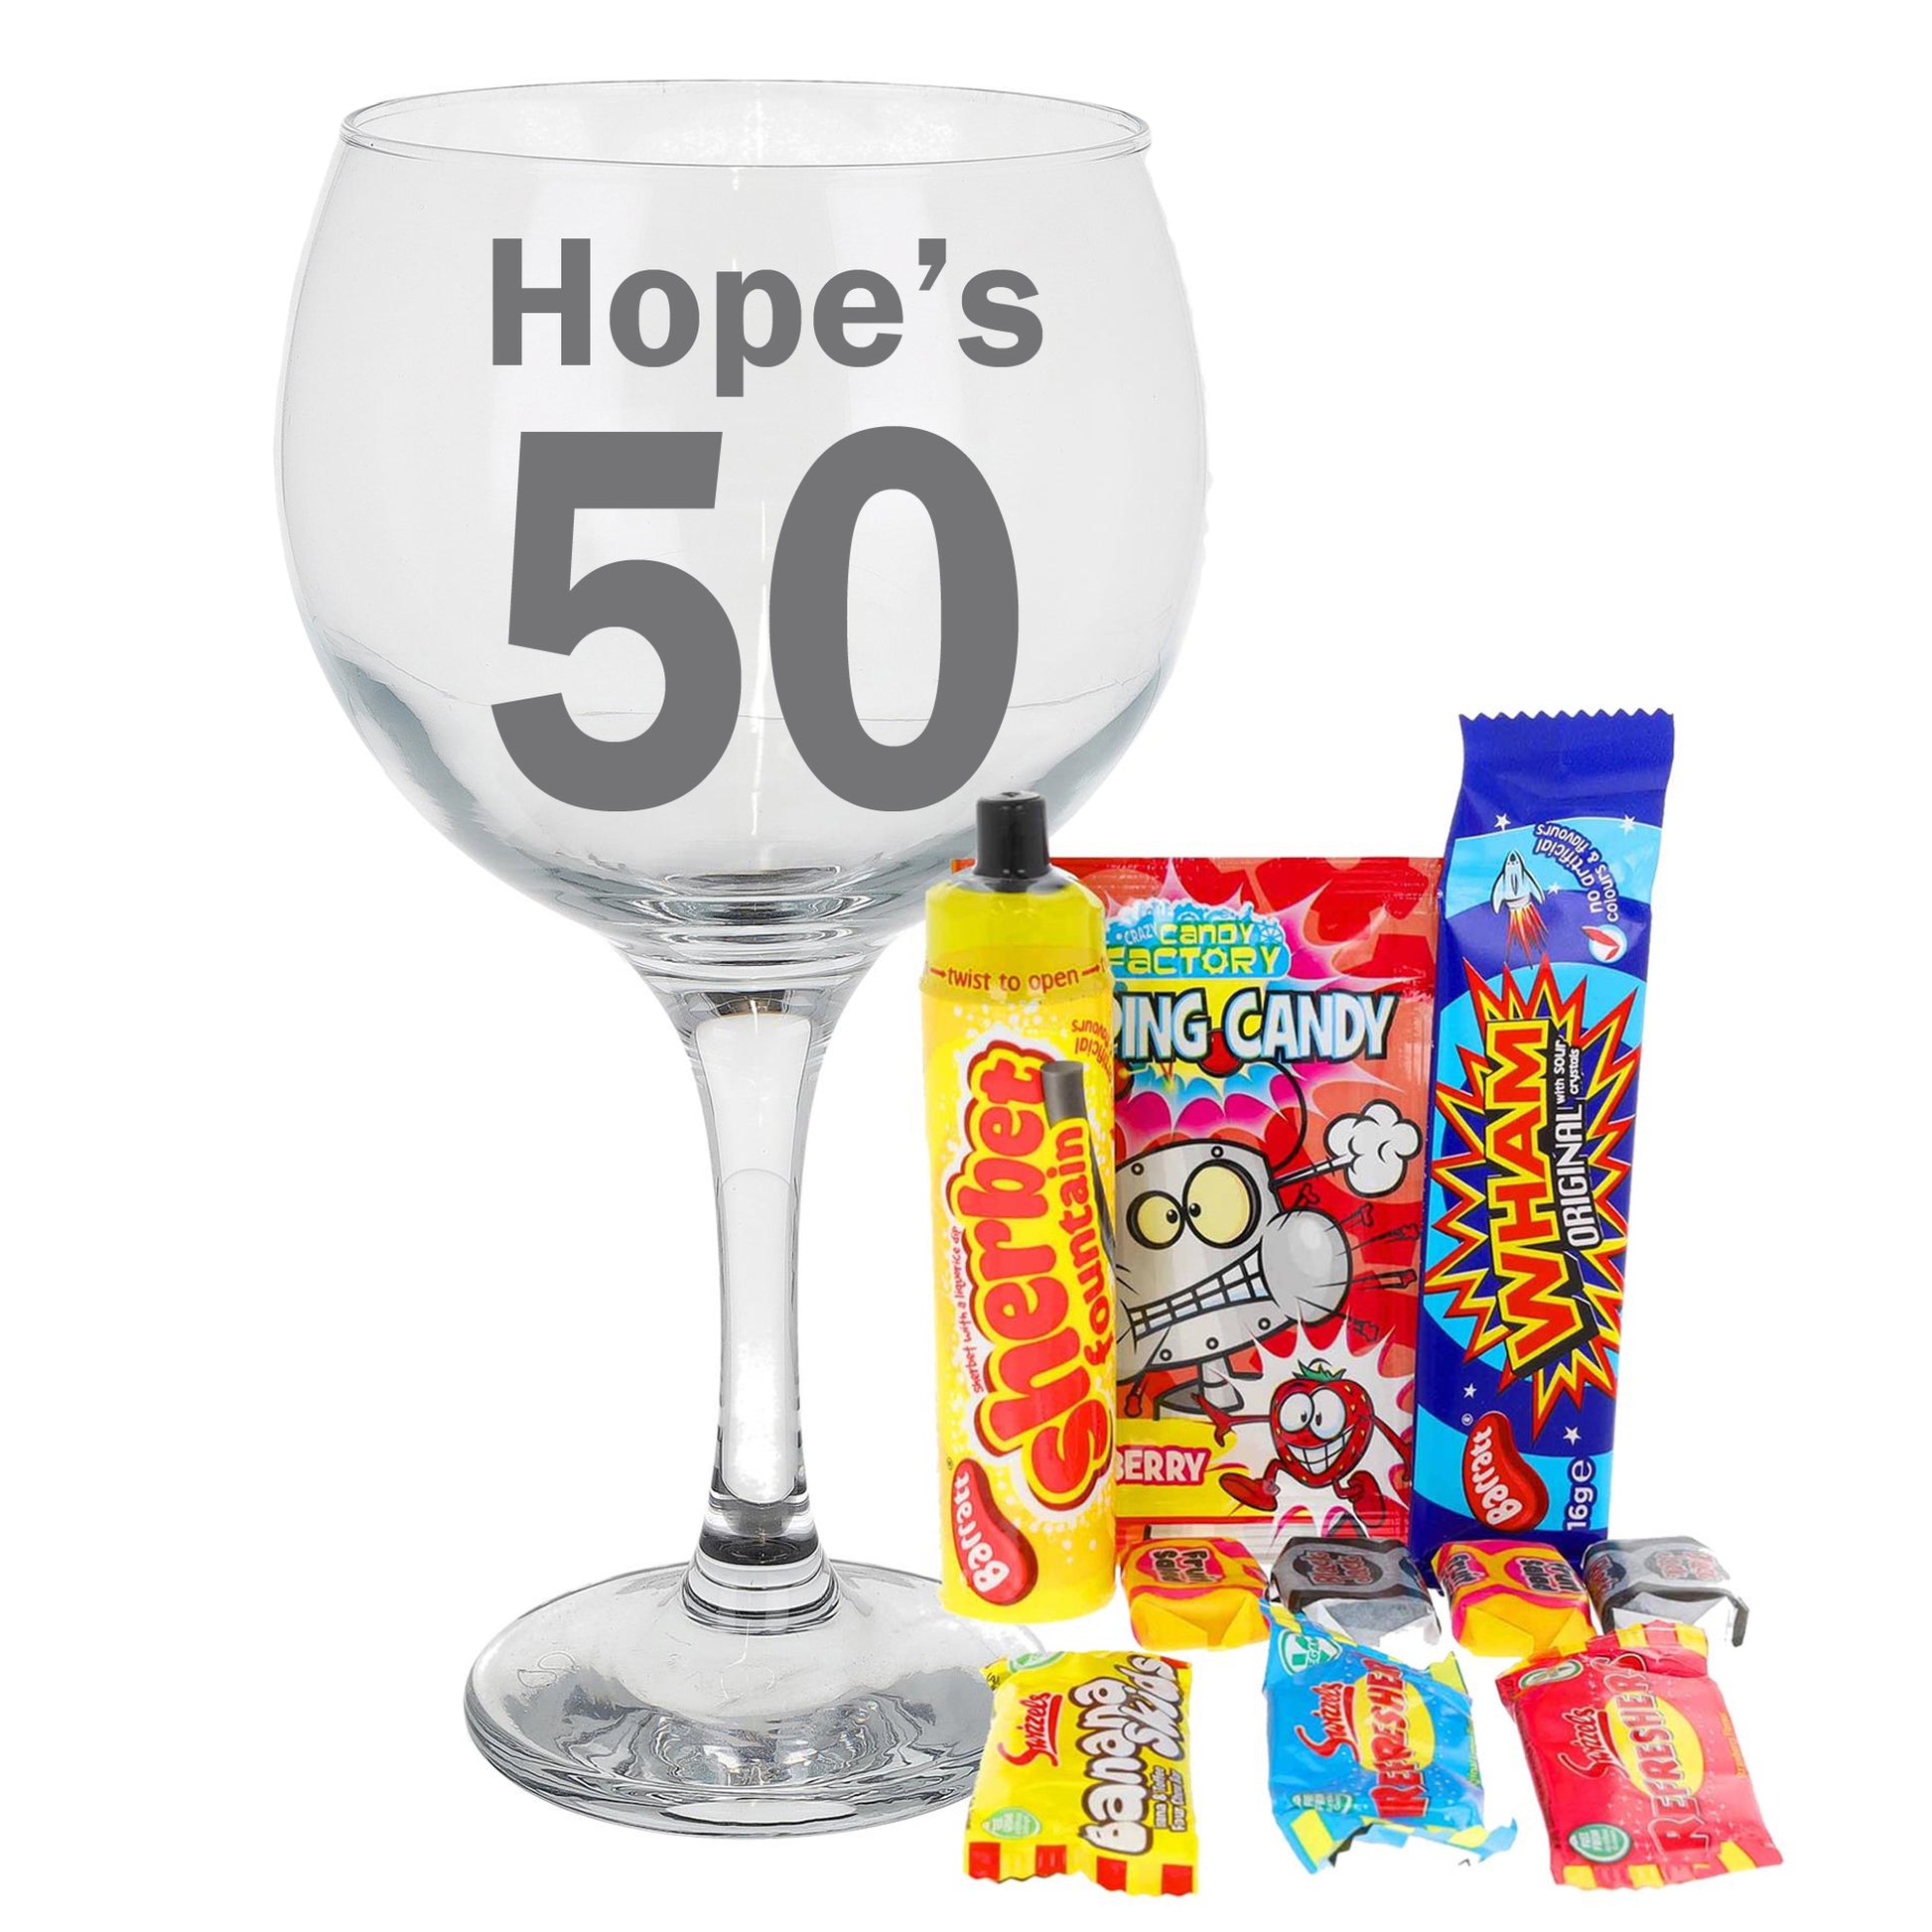 Personalised Engraved Birthday Gin Glass Gift  - Always Looking Good - Gin Glass & Sweets  